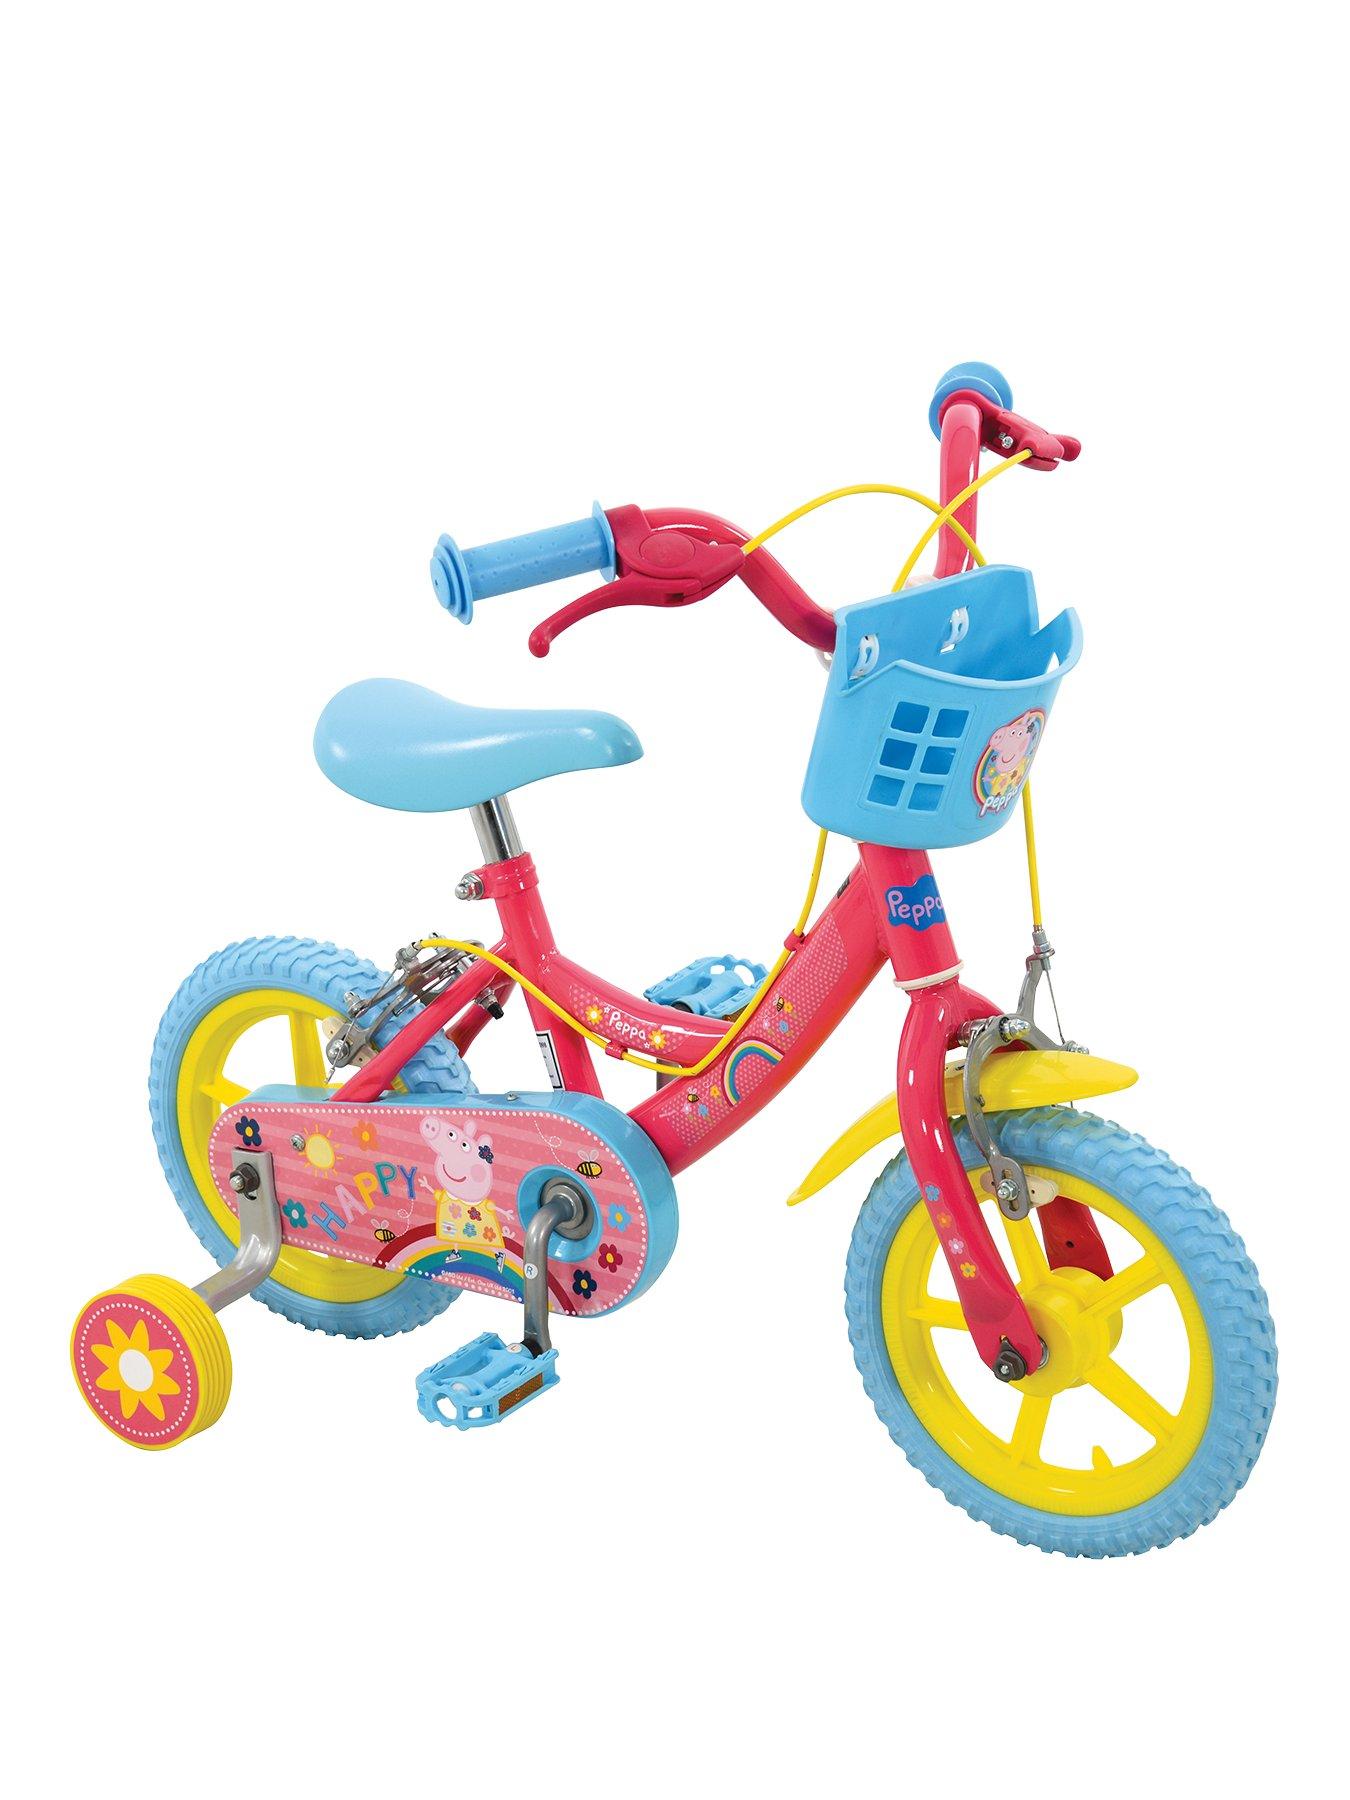 12 bikes for toddlers